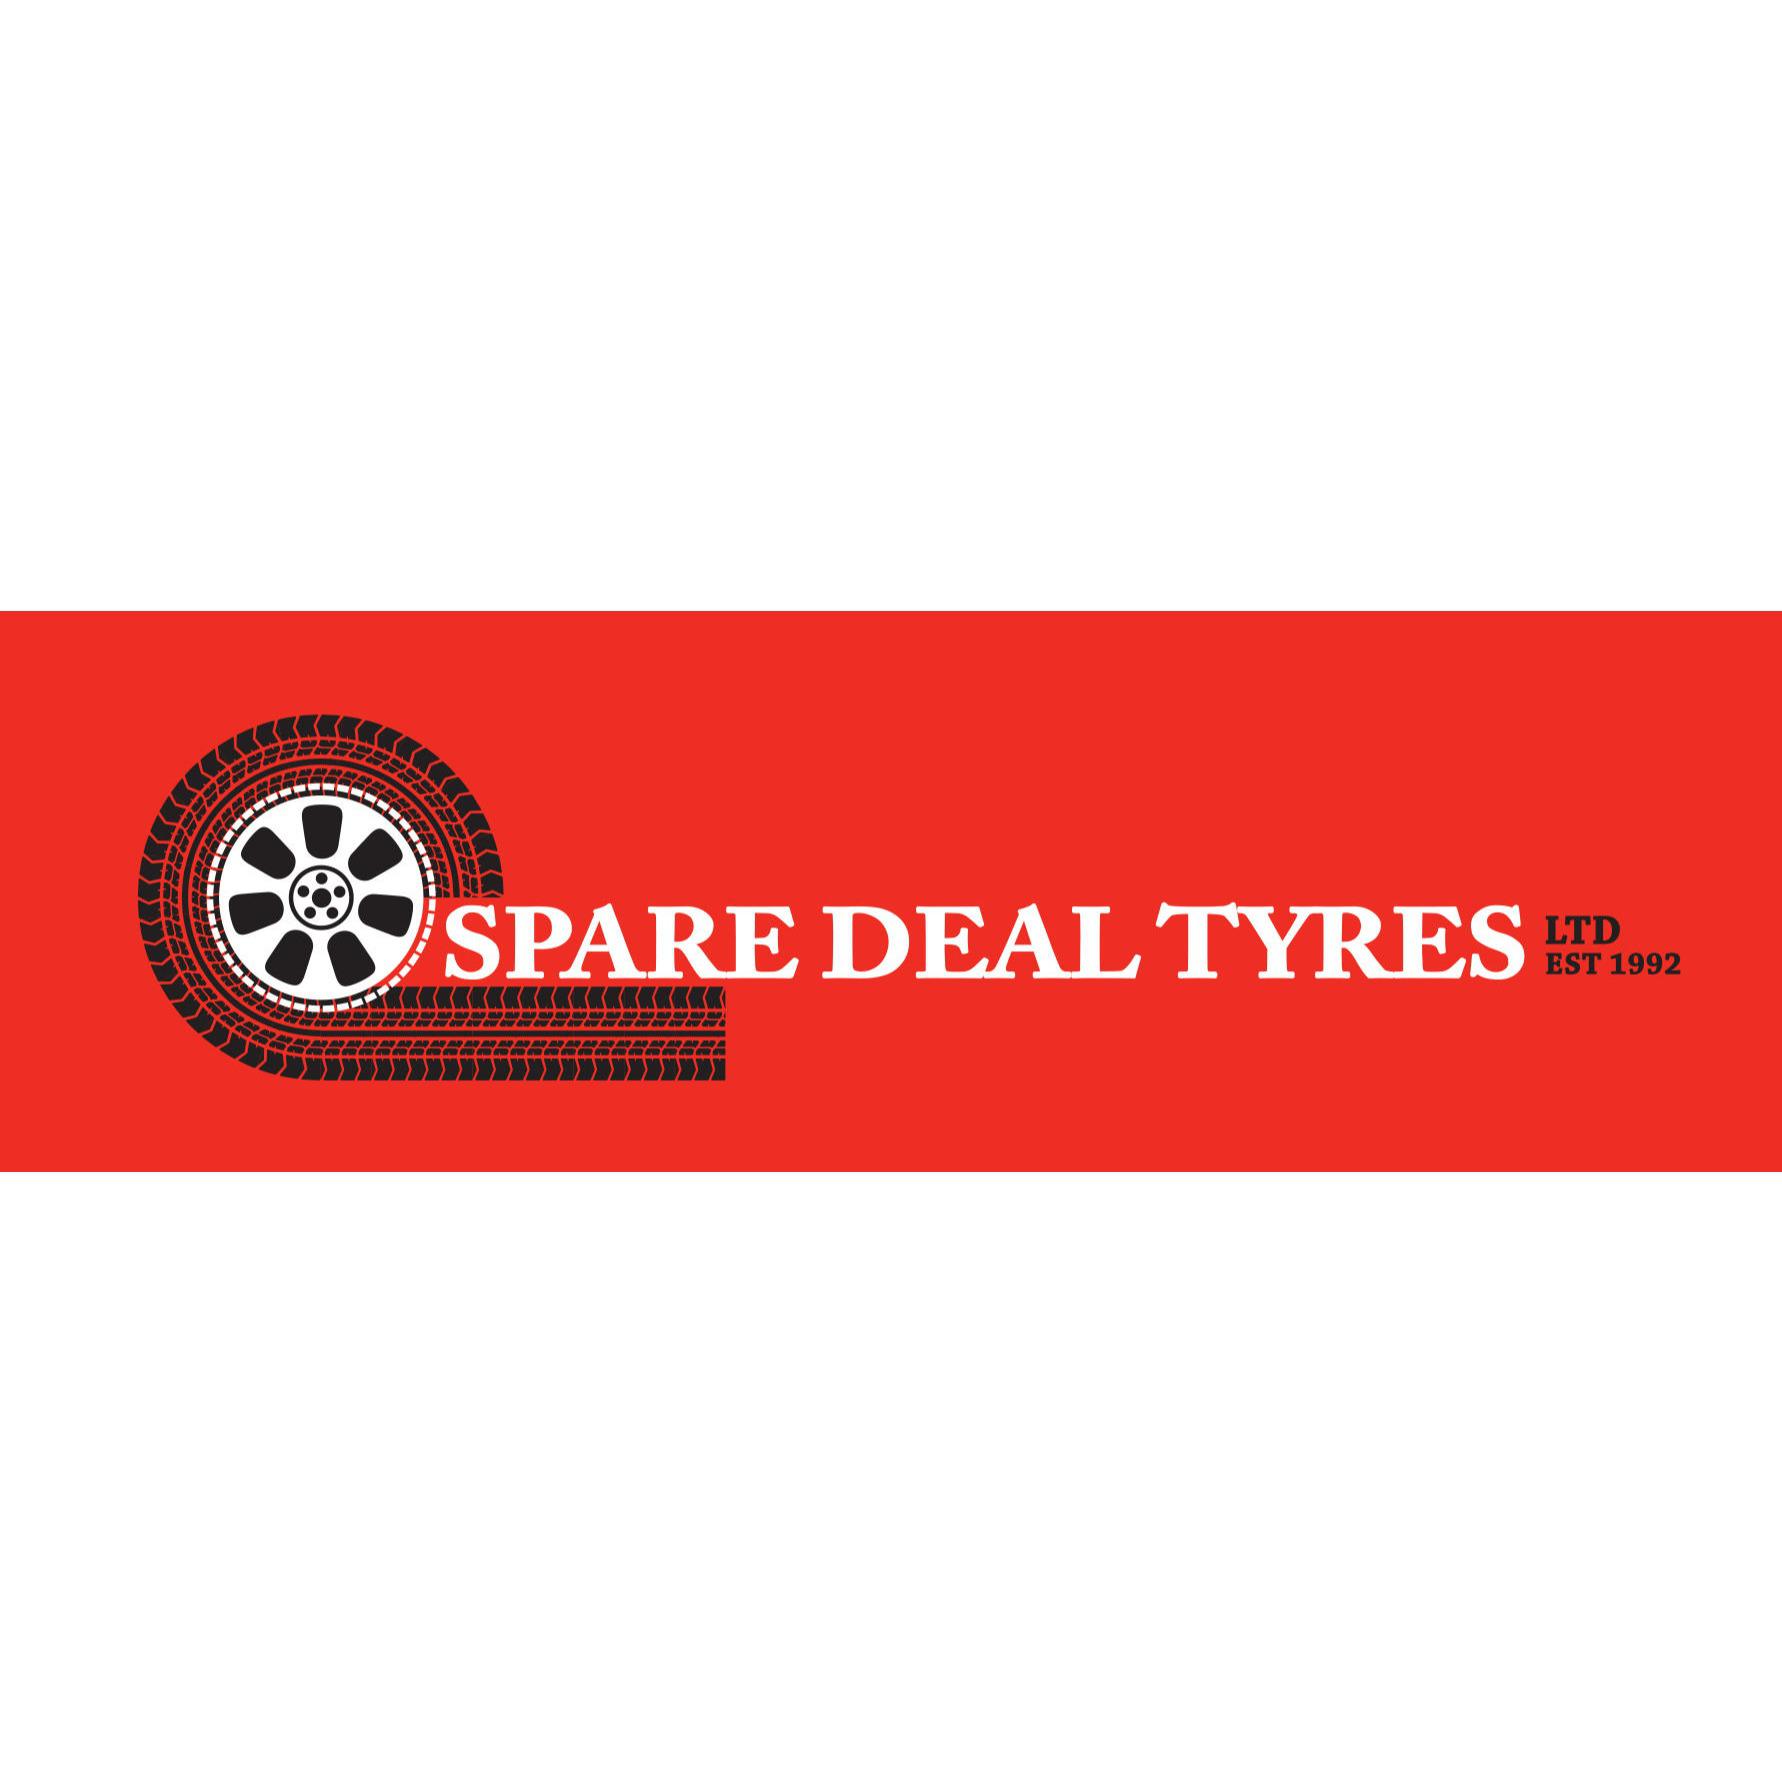 SPARE DEAL TYRES LTD IN WOLLATON , NOTTINGHAM. LOGO. SPARE DEAL TYRES LTD Nottingham 01159 281249